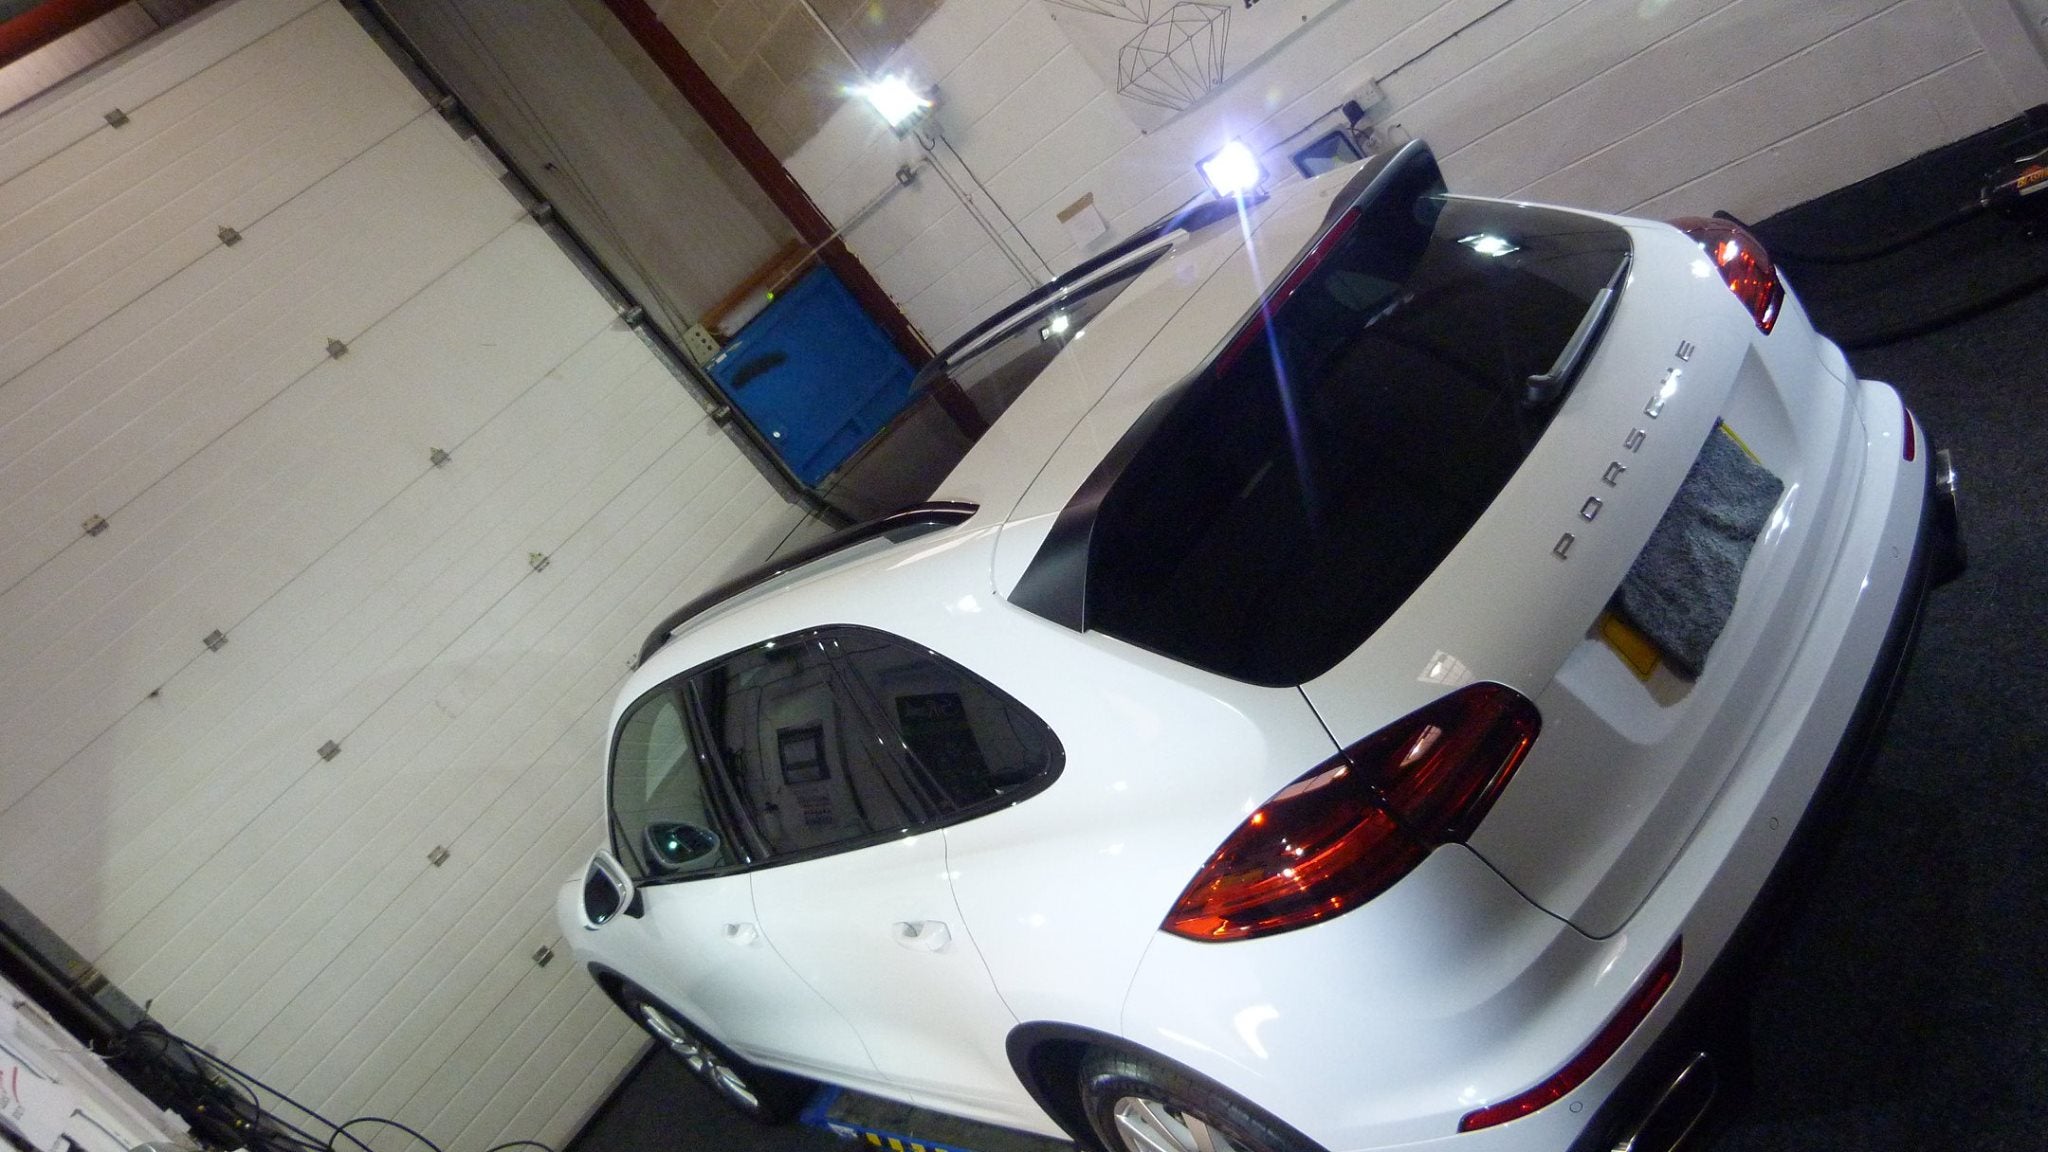 Porsche looking as it should flawless another happy customer